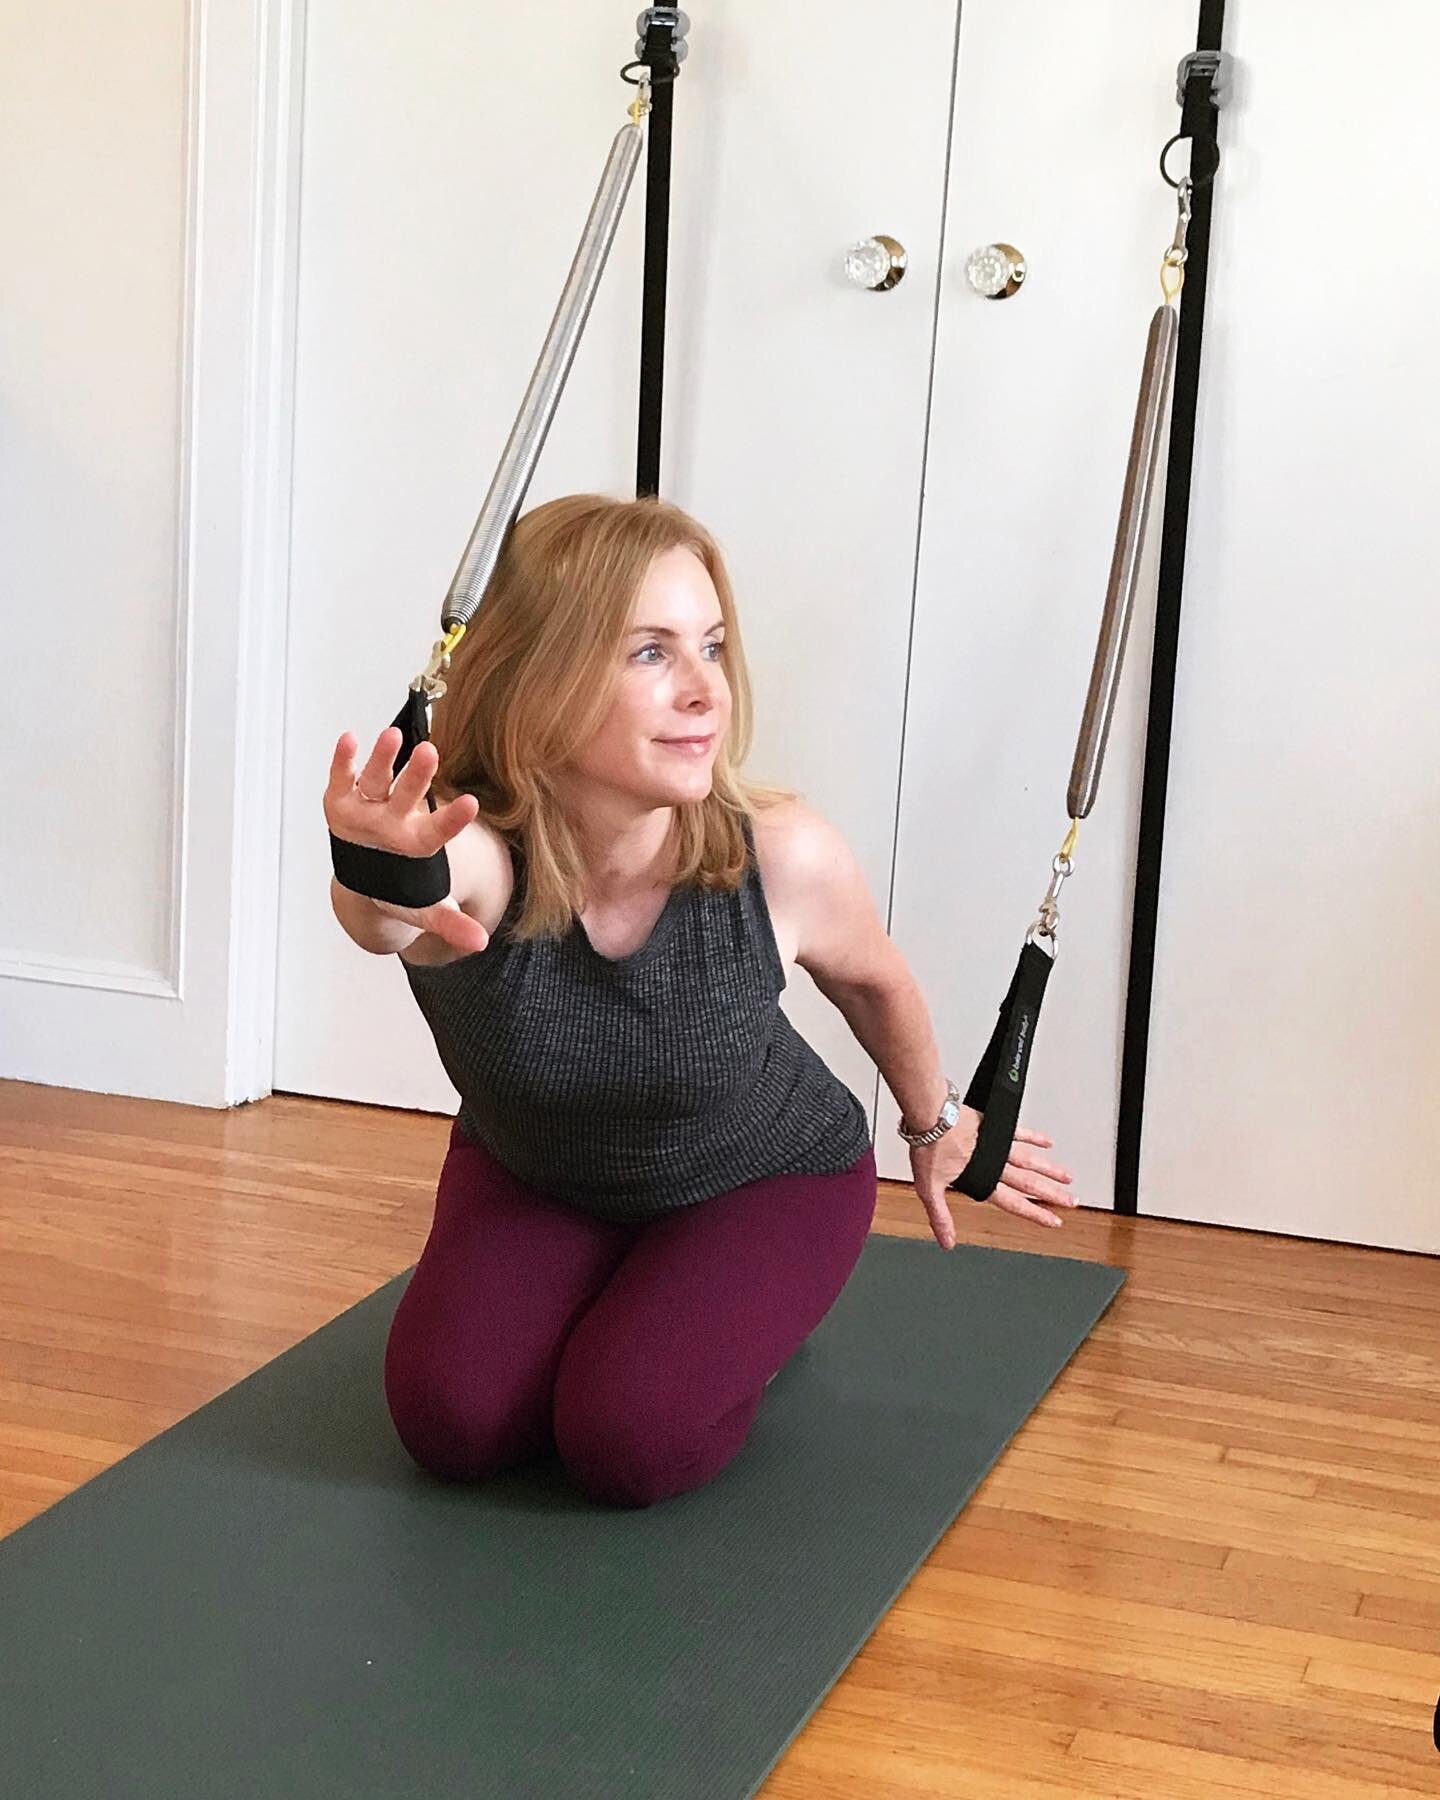 Up next in our trainer profile series is ITT PILATES graduate turned trainer Hilary Power Steinberg!

What classes do you teach?

I am currently teaching several classes. The Movement with the Magic Circle and Cardio with the Magic Circle are new sin